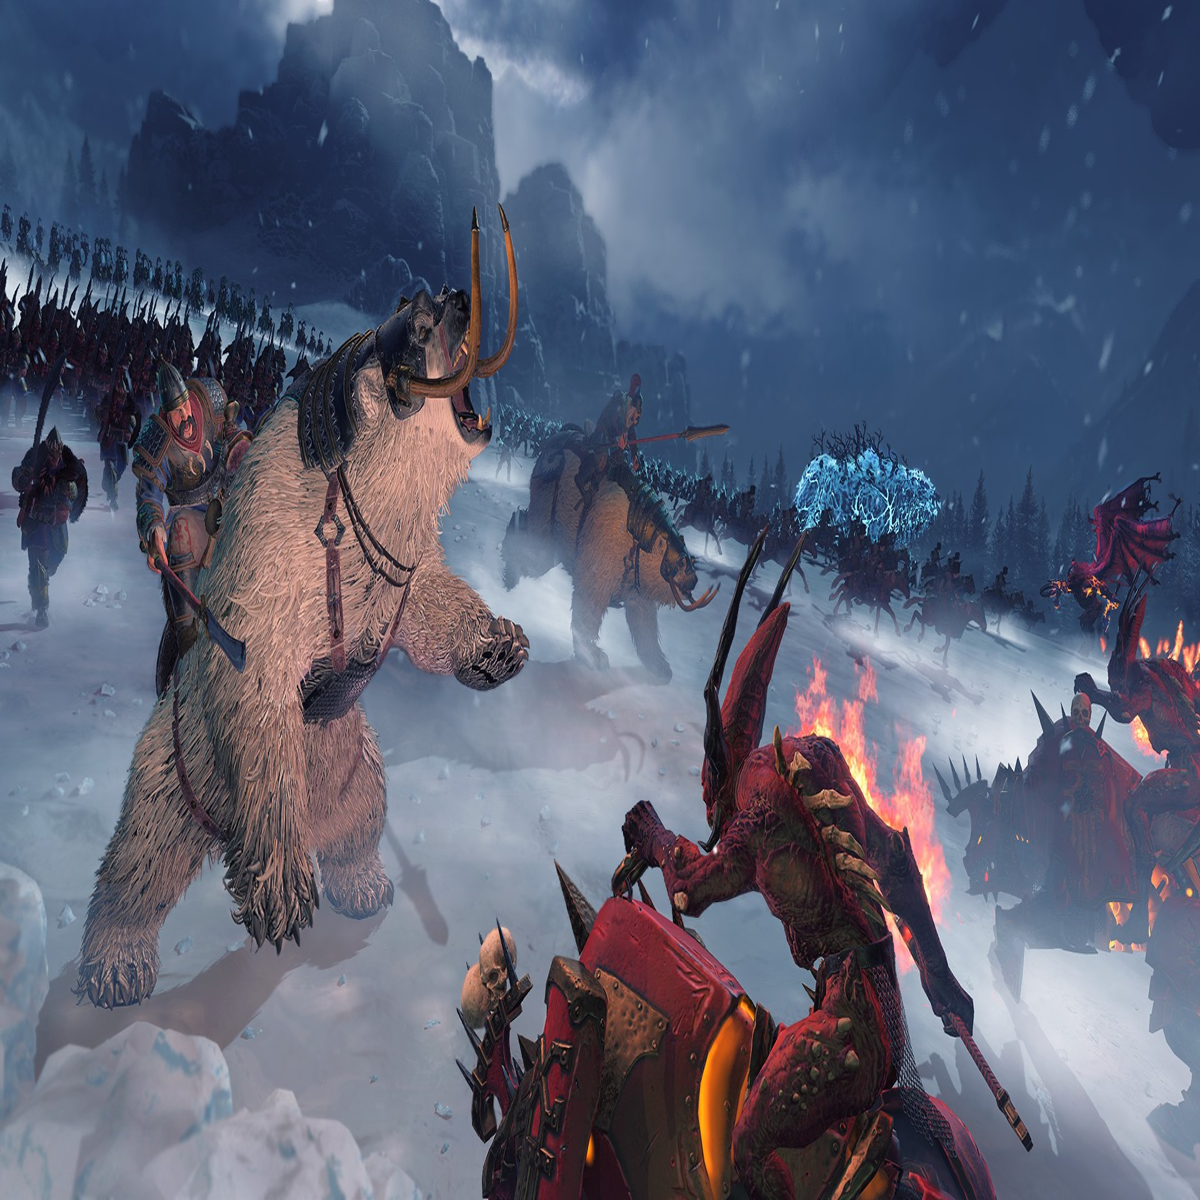 Total War: Warhammer 3' Has Everything You Want, and Some Old